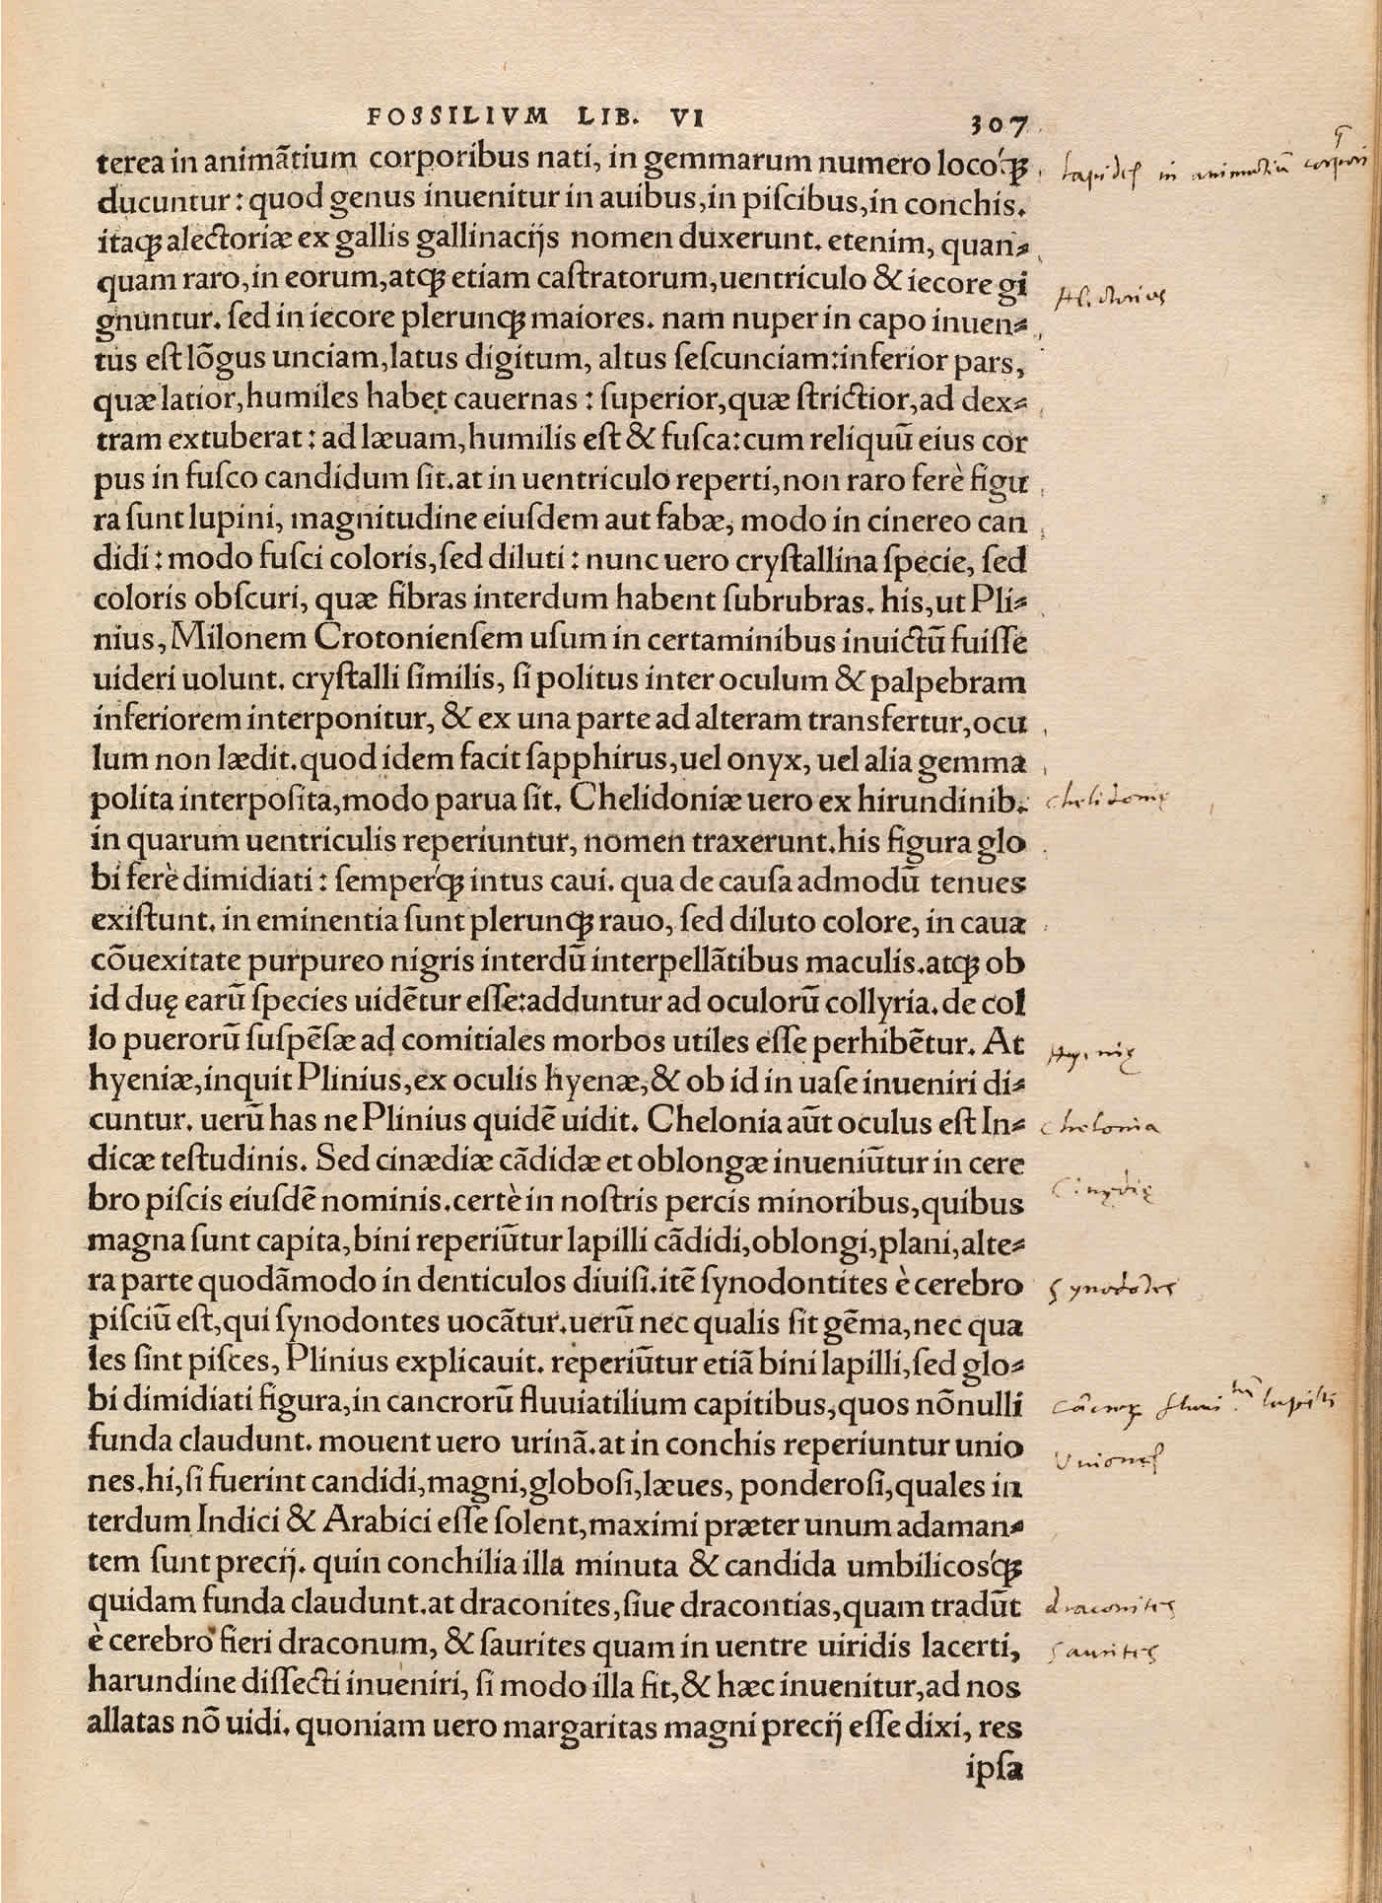 Image 5 from GEORG AGRICOLA (1494 - 1555). De Ortu et Causis Subterraneorum [and other works]. Basel: Hieronymus Frobenius and Nikolaus Episcopius, 1546.